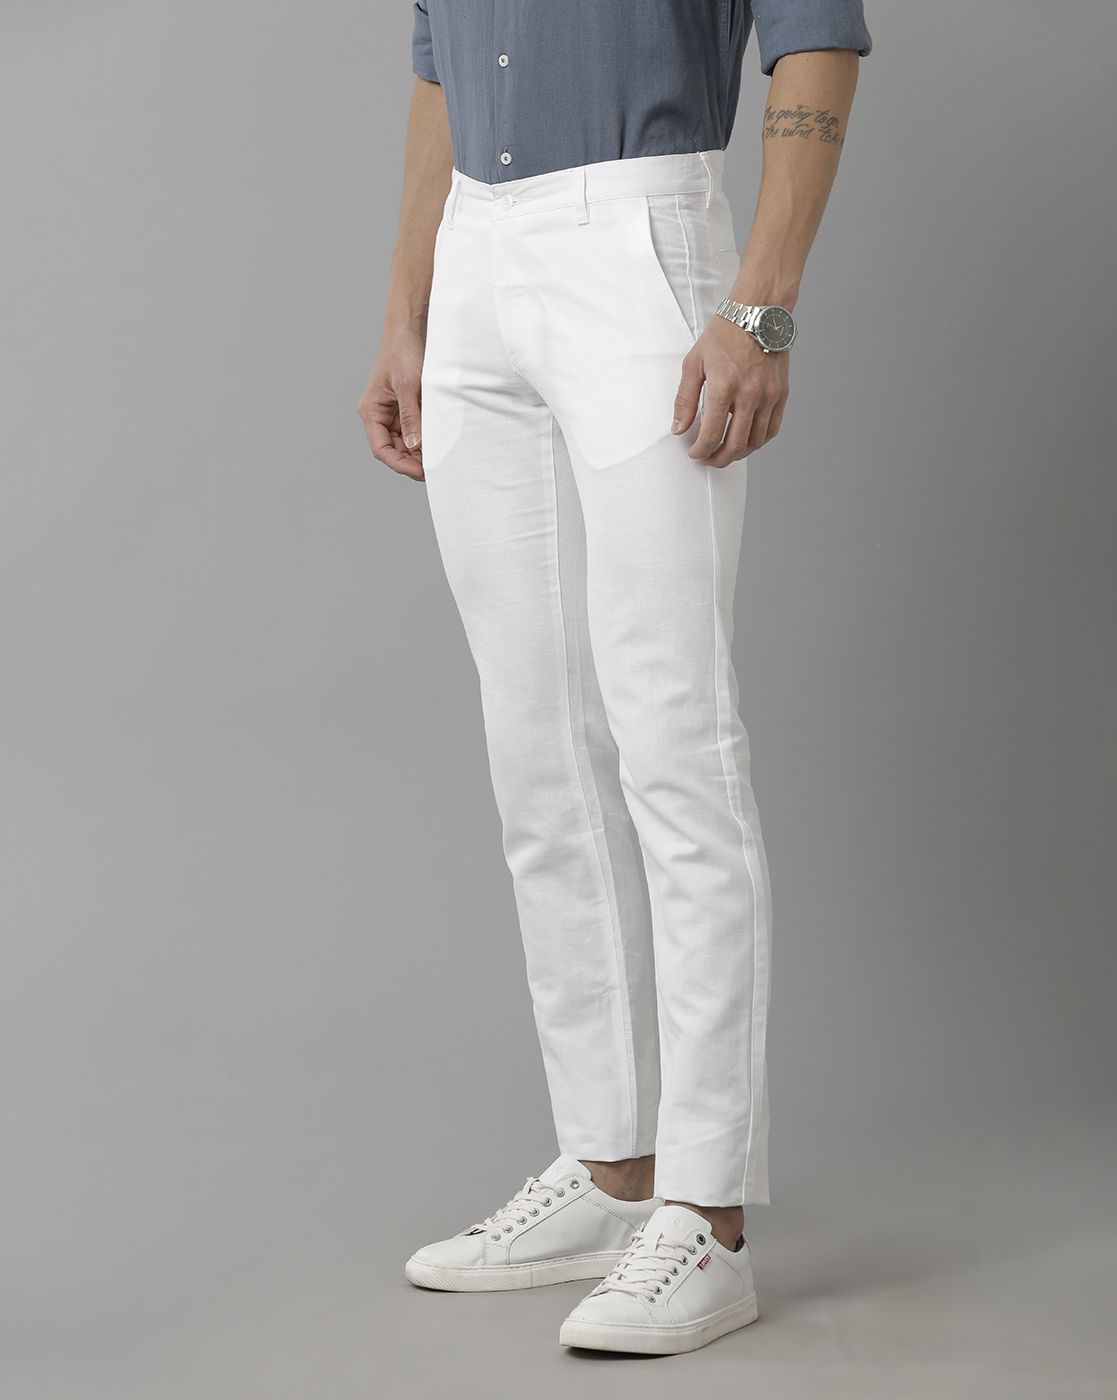 Buy OffWhite Trousers  Pants for Men by NETPLAY Online  Ajiocom